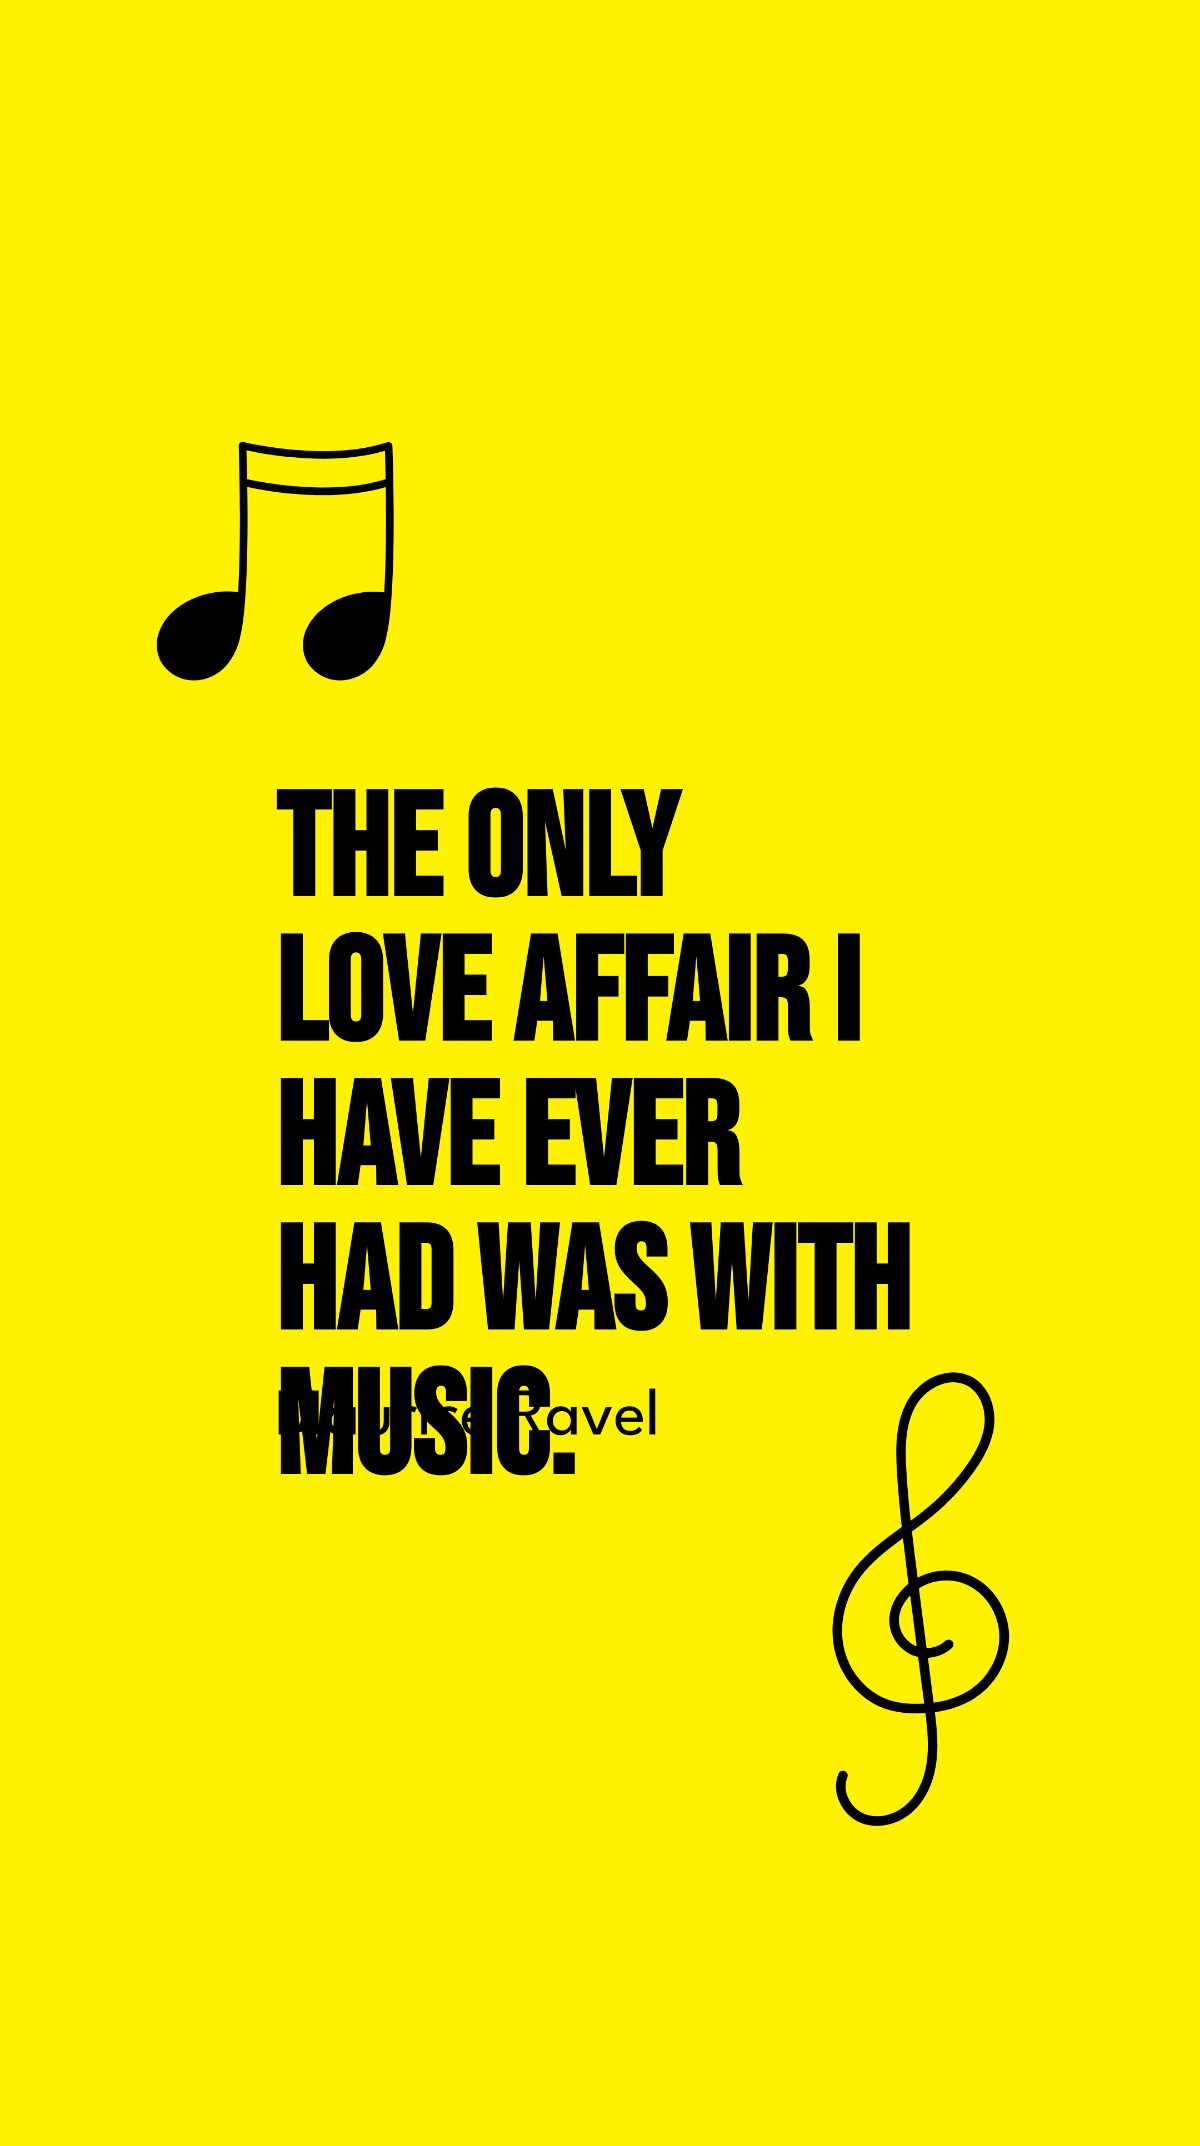 Maurice Ravel - The only love affair I have ever had was with music. Template